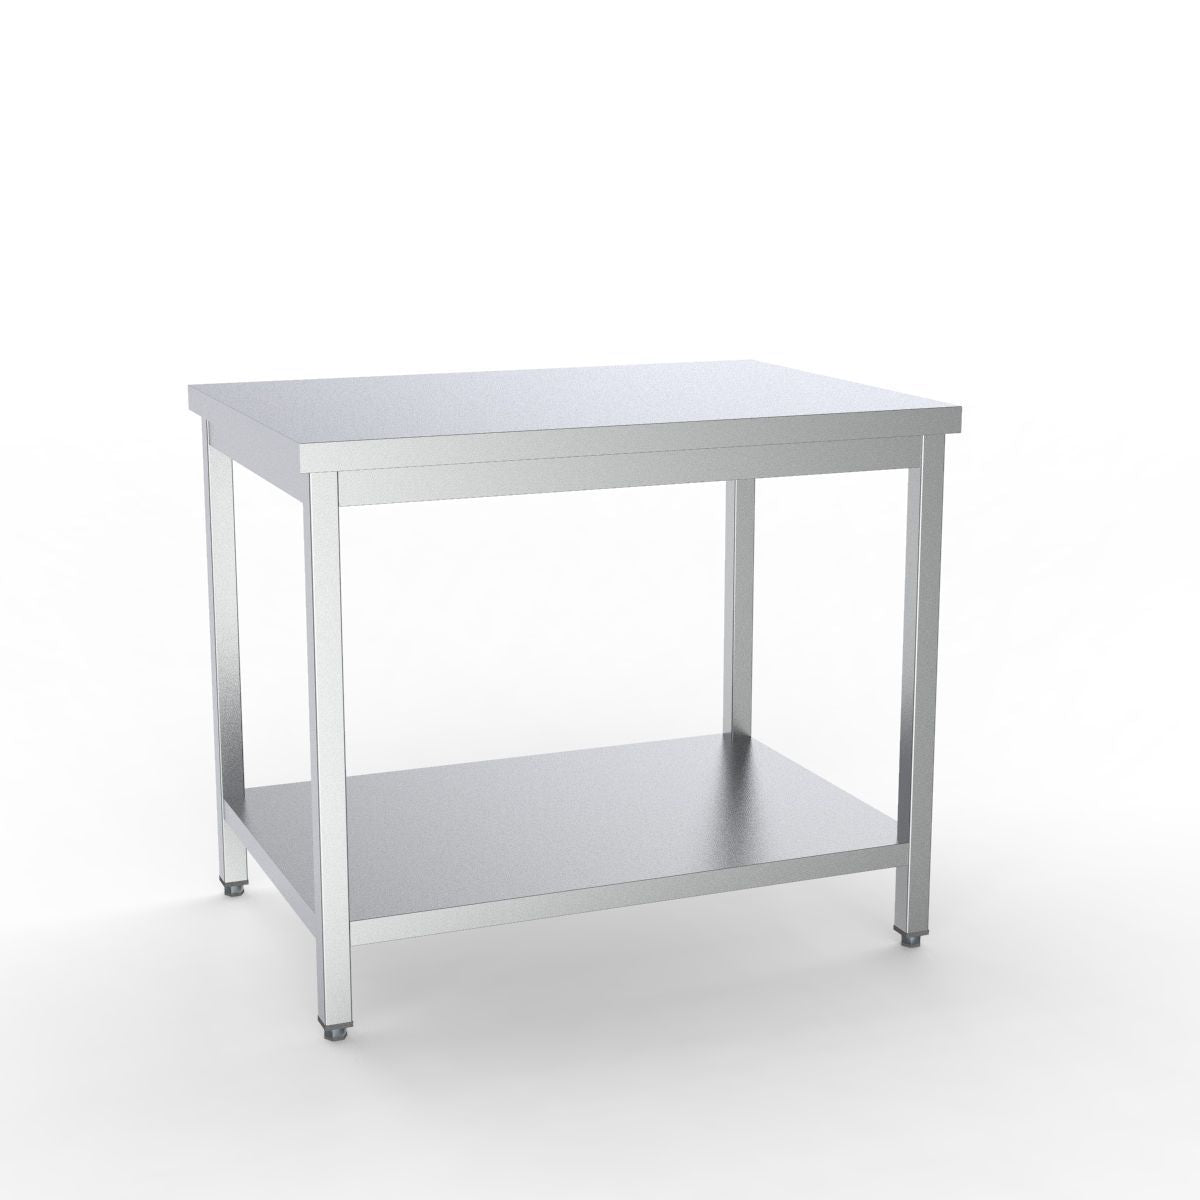 Combisteel Full 430 Stainless Steel 700 Line Worktable With Shelf 900mm Wide - 7333.0077